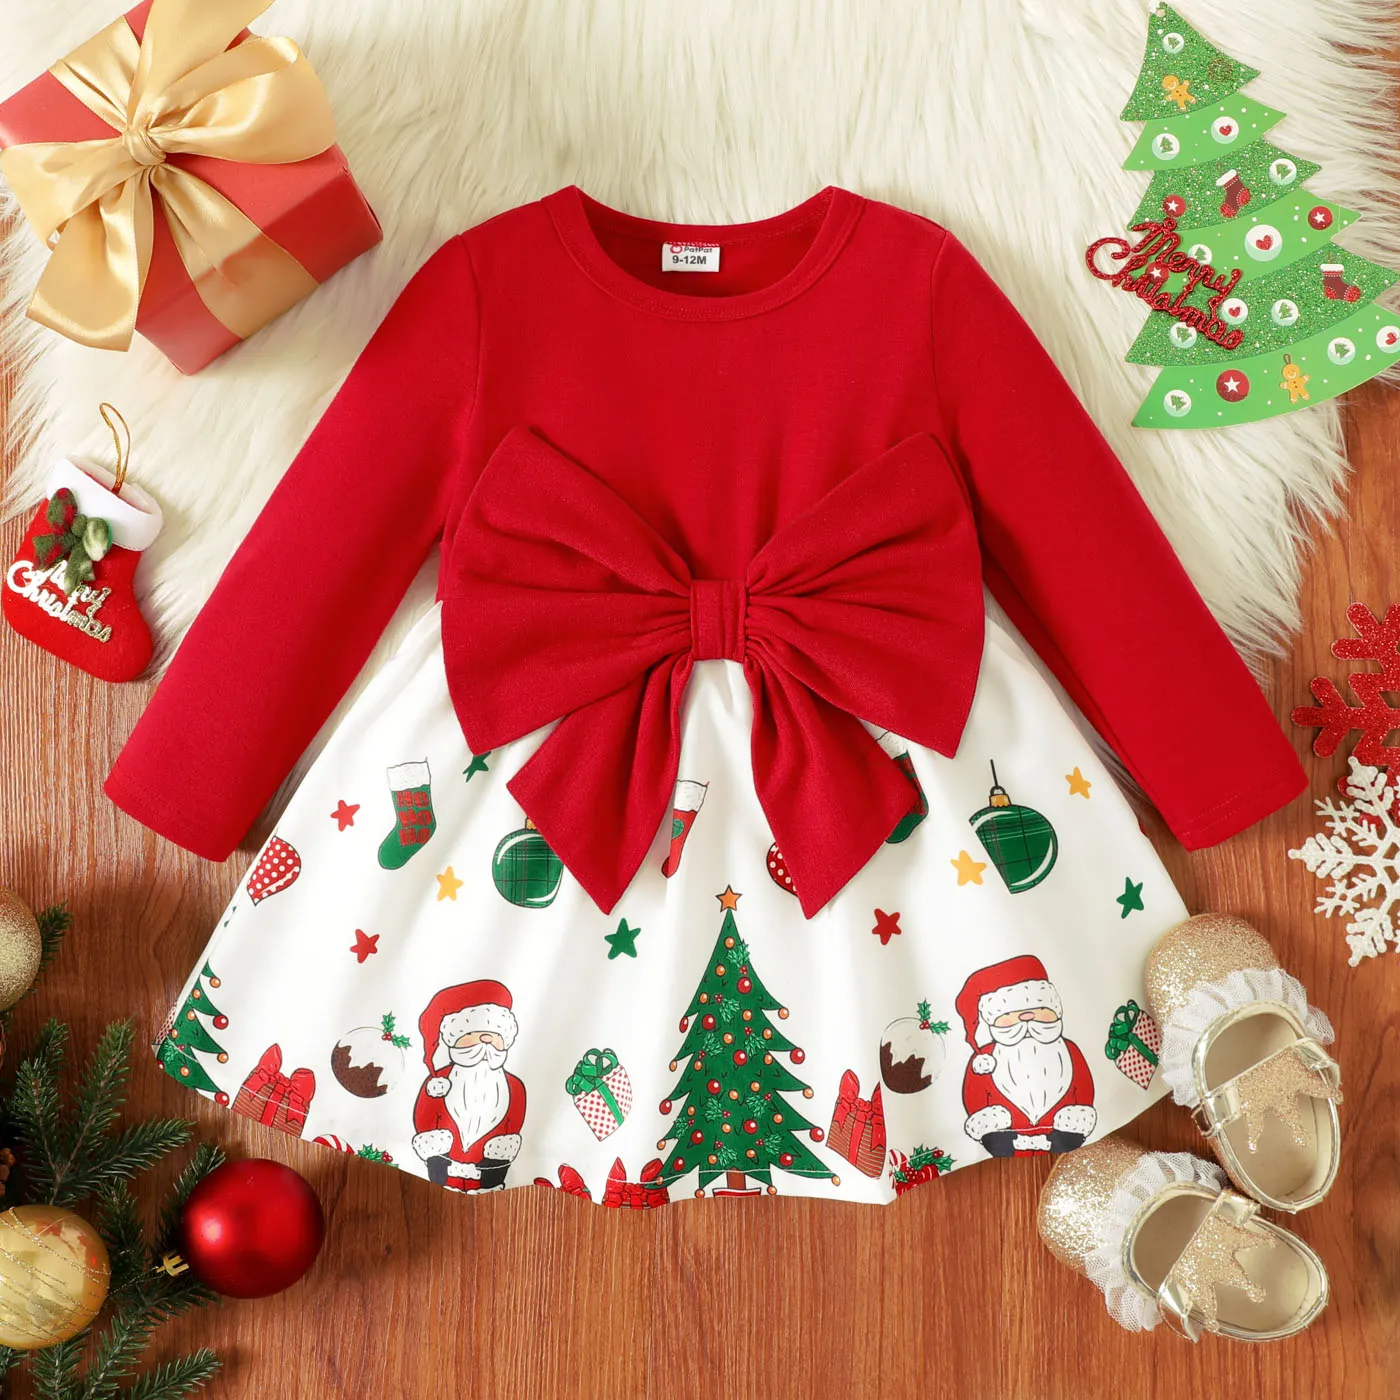 Red Santa Claus Christmas Princess Dress For Girls Perfect For Xmas Parties  And Happy Year Available In Sizes 2 6 Years From Ursosmart, $10.44 |  DHgate.Com